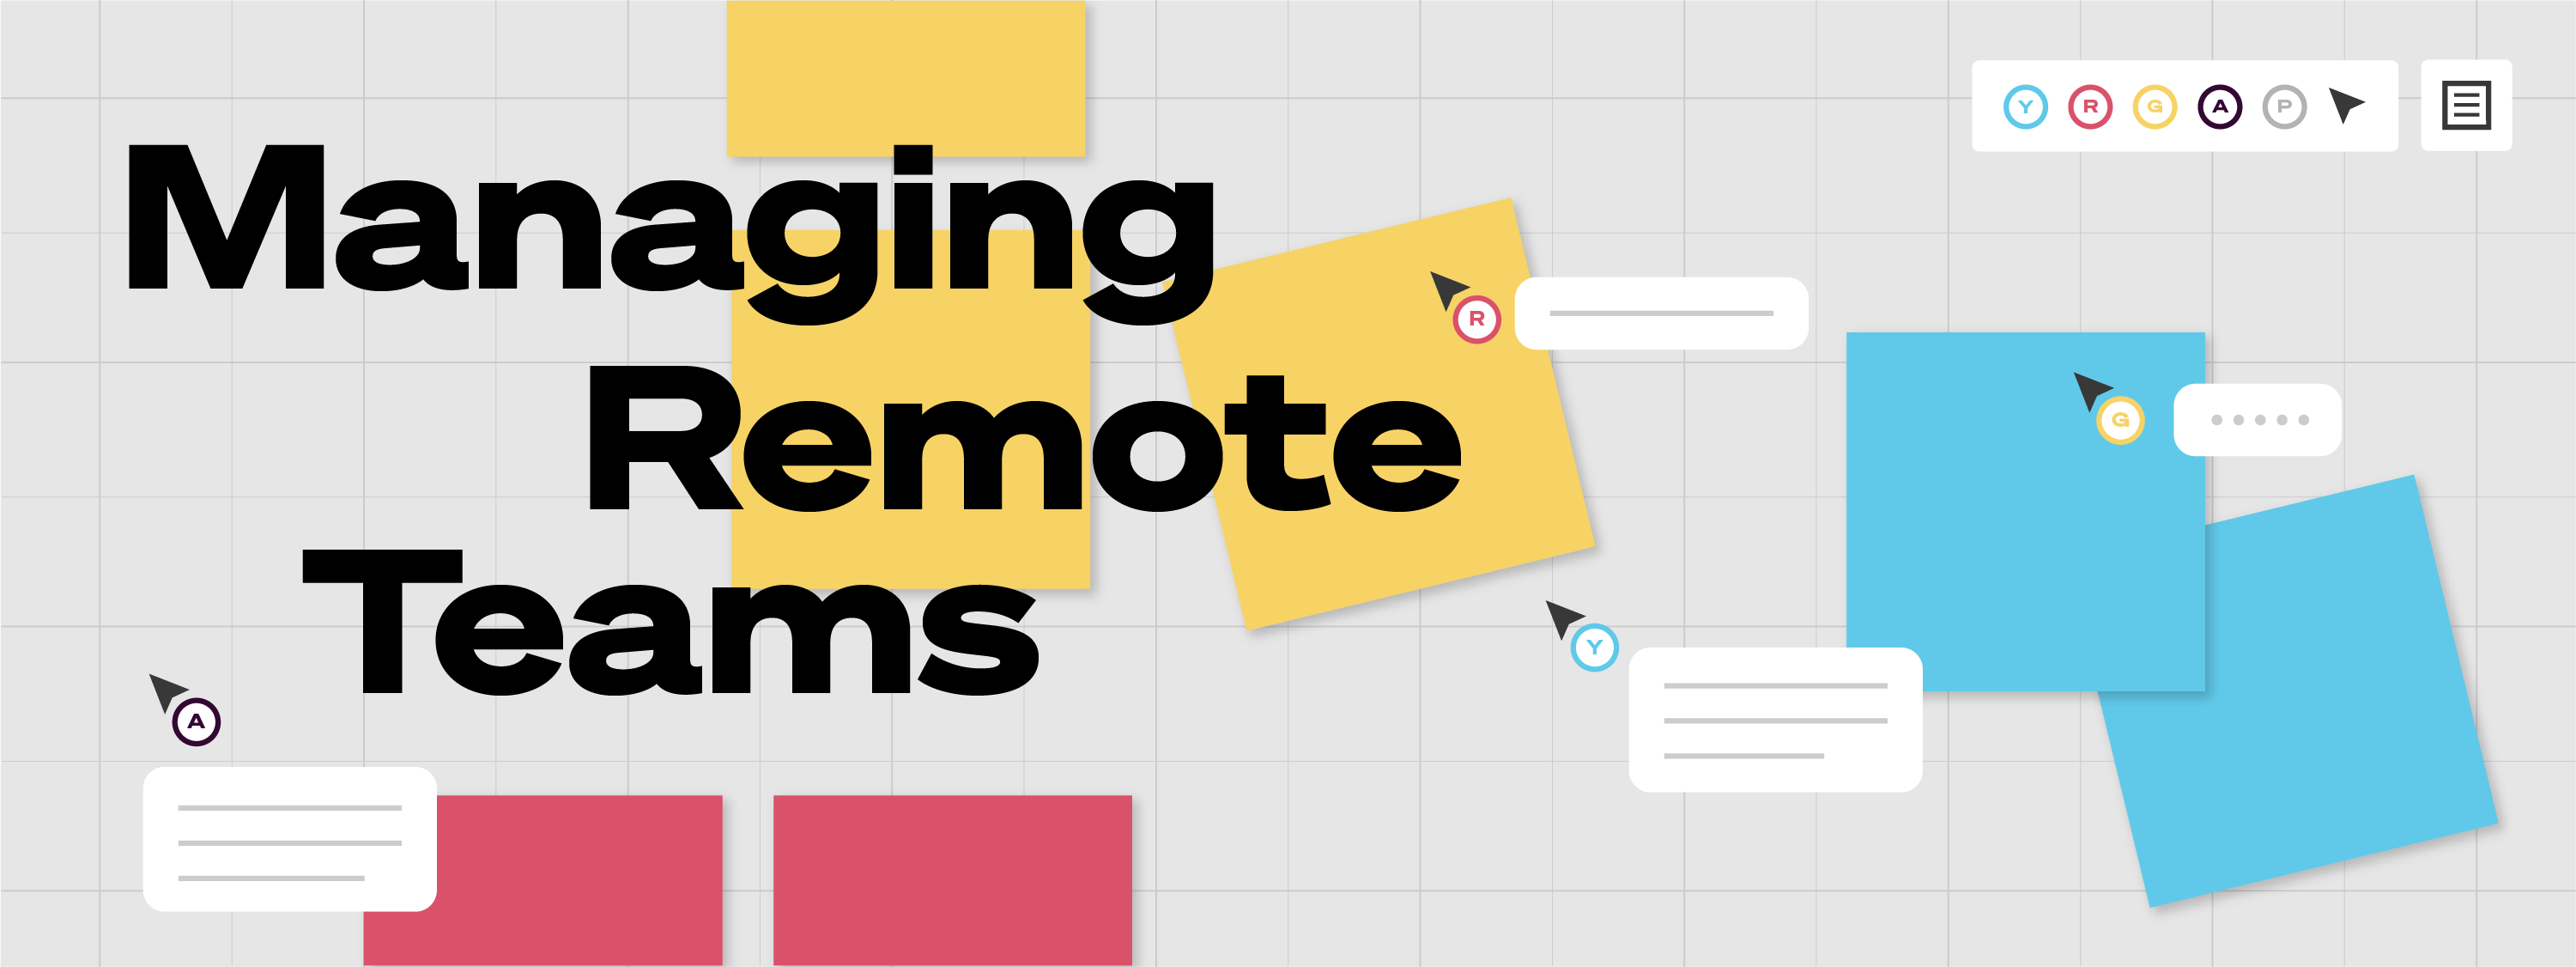 Mananging remote teams youtube event